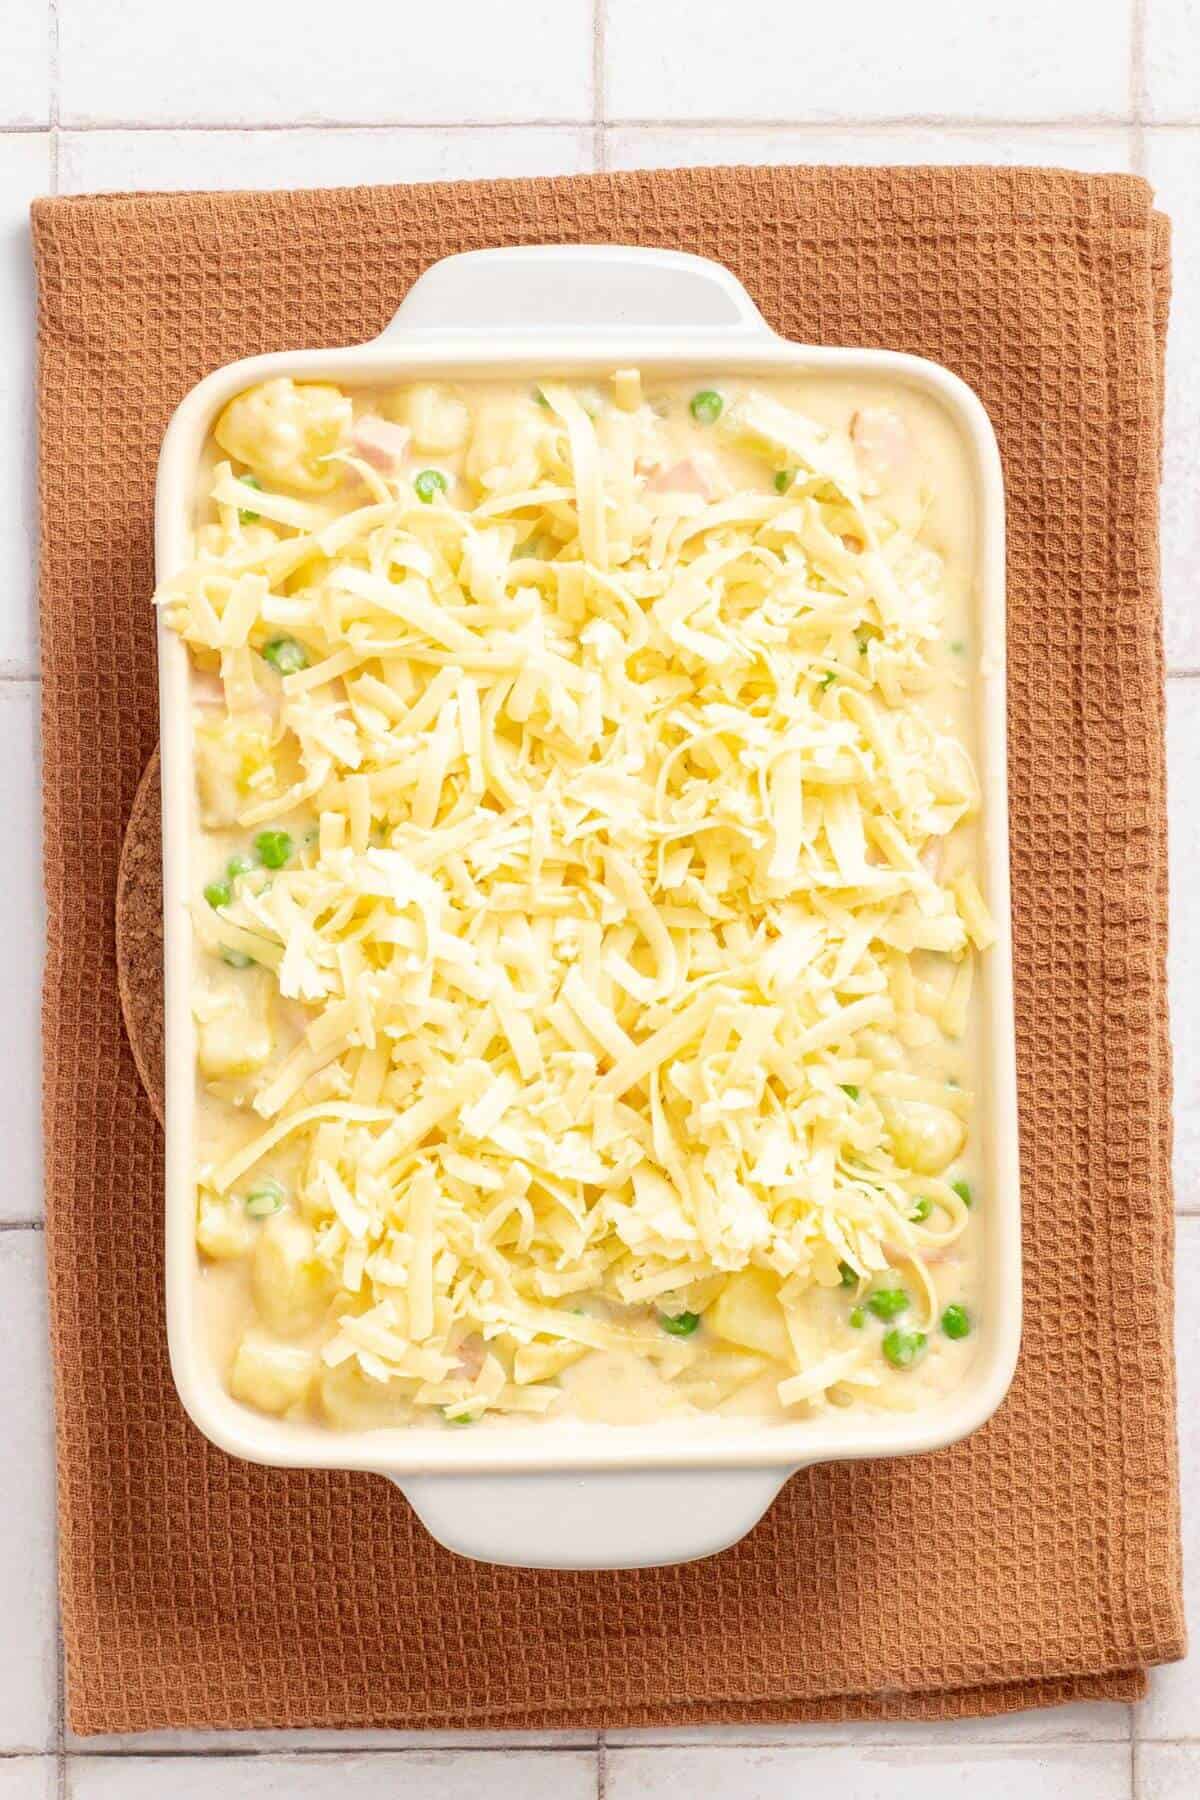 A casserole dish filled with a creamy ham, potato, and pea mixture, topped with shredded cheese, on a brown cloth.